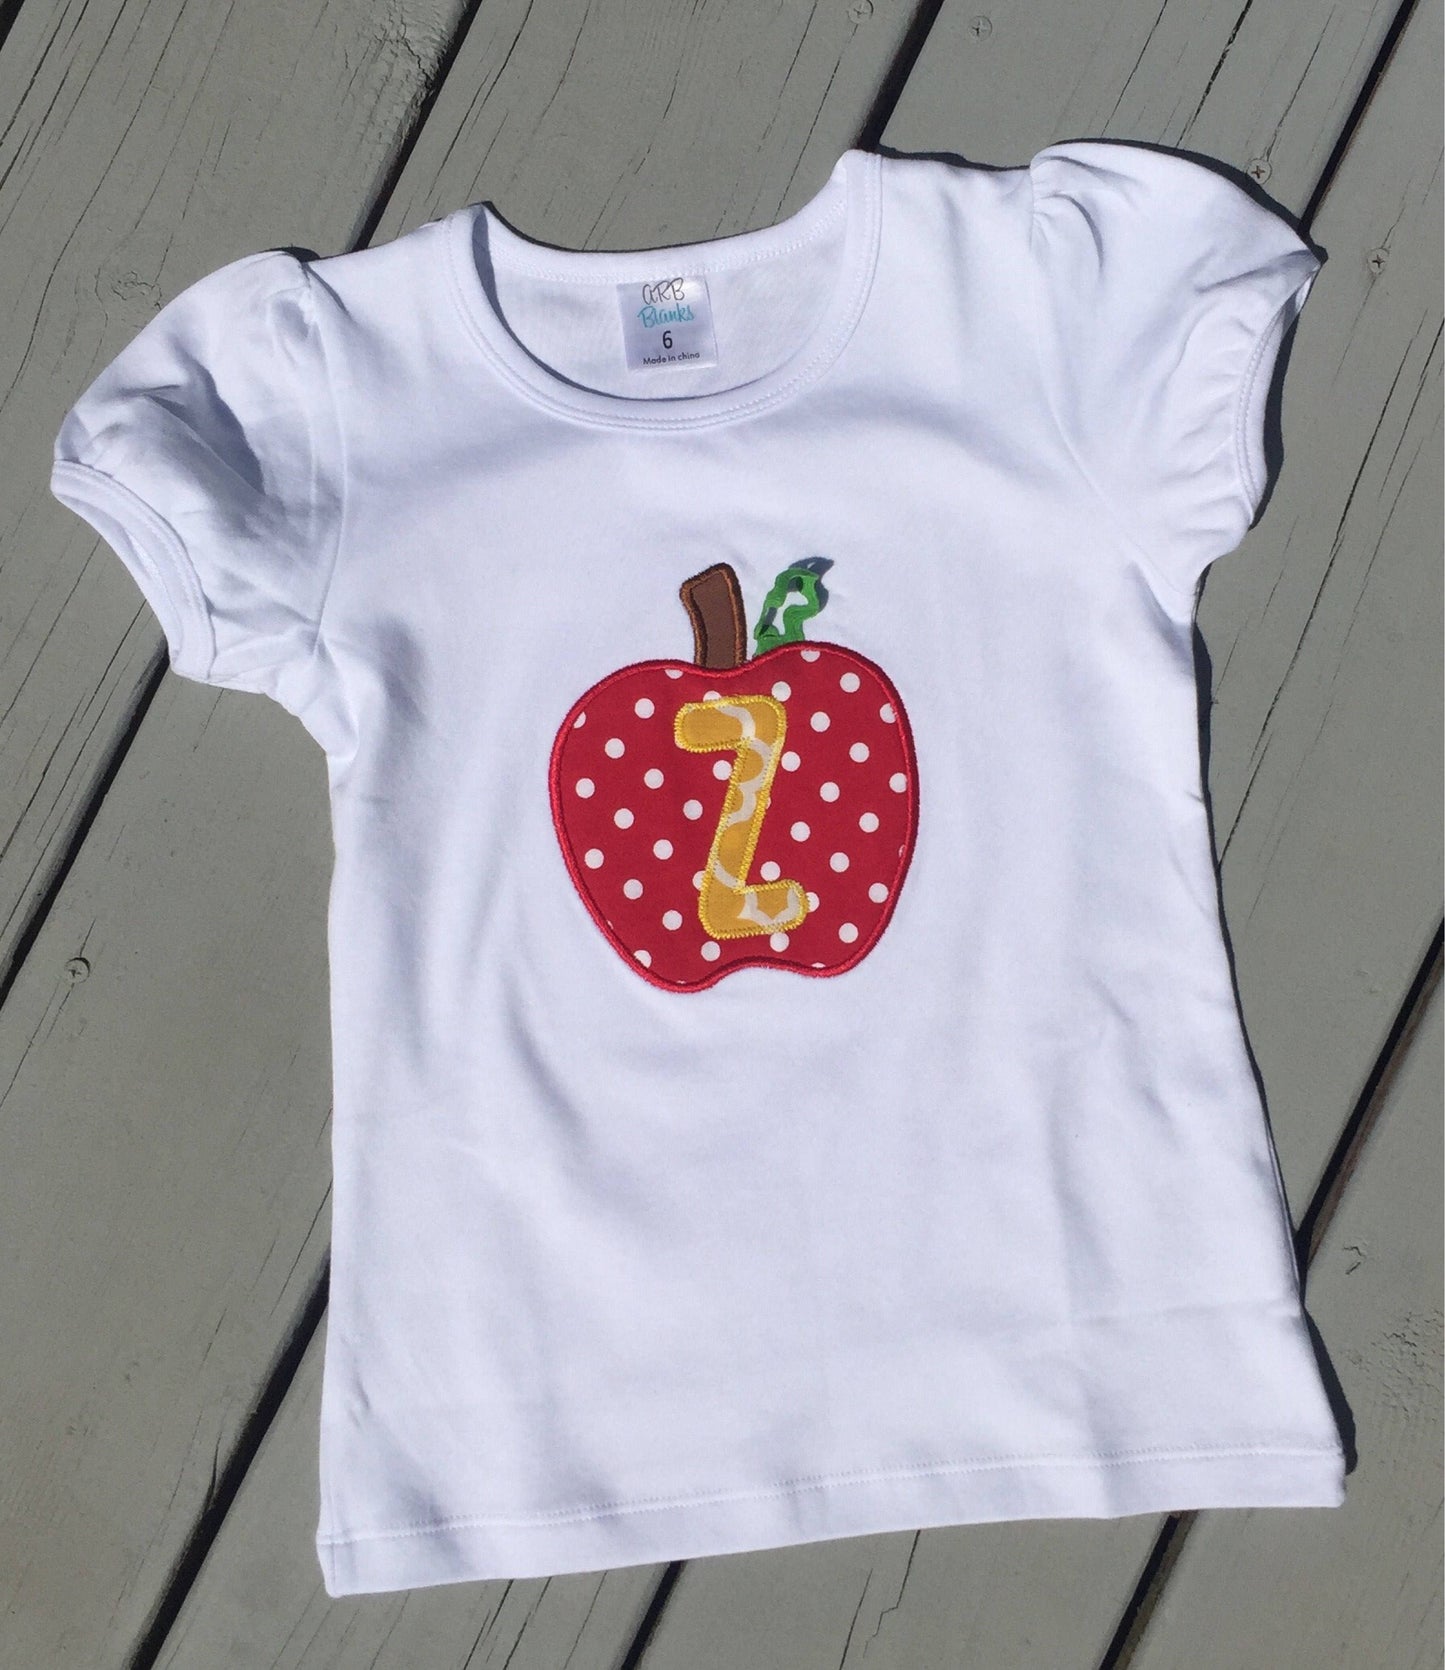 Back to school shirt, Fast Shipping - 1-3 days, apple shirt, back to School outfit, apple initial shirt, back to school